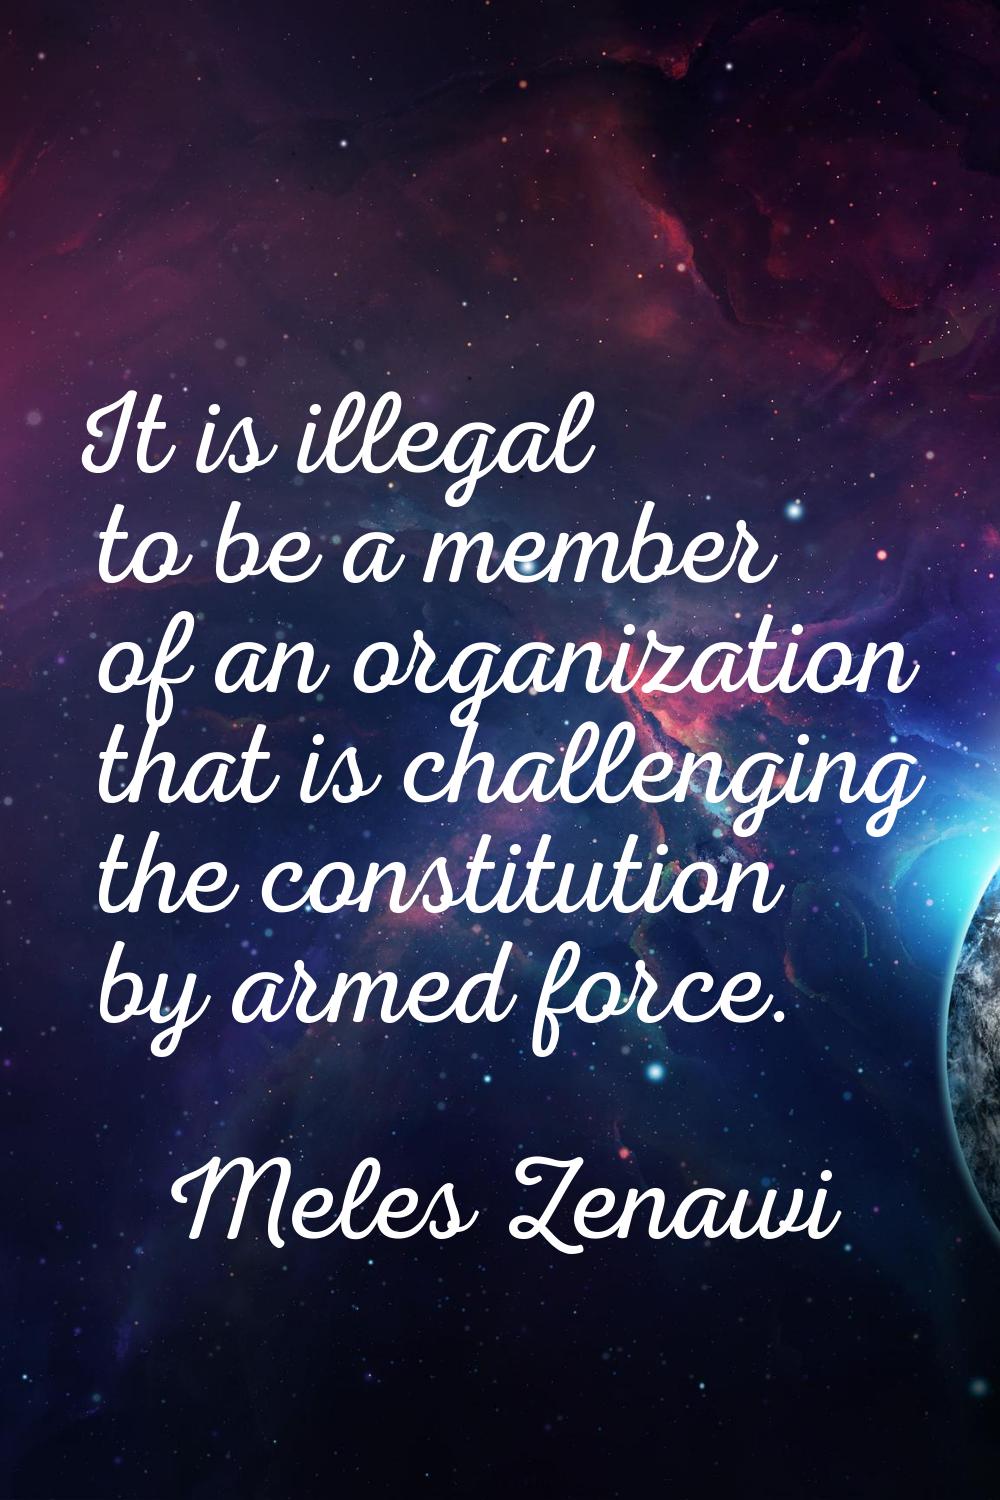 It is illegal to be a member of an organization that is challenging the constitution by armed force